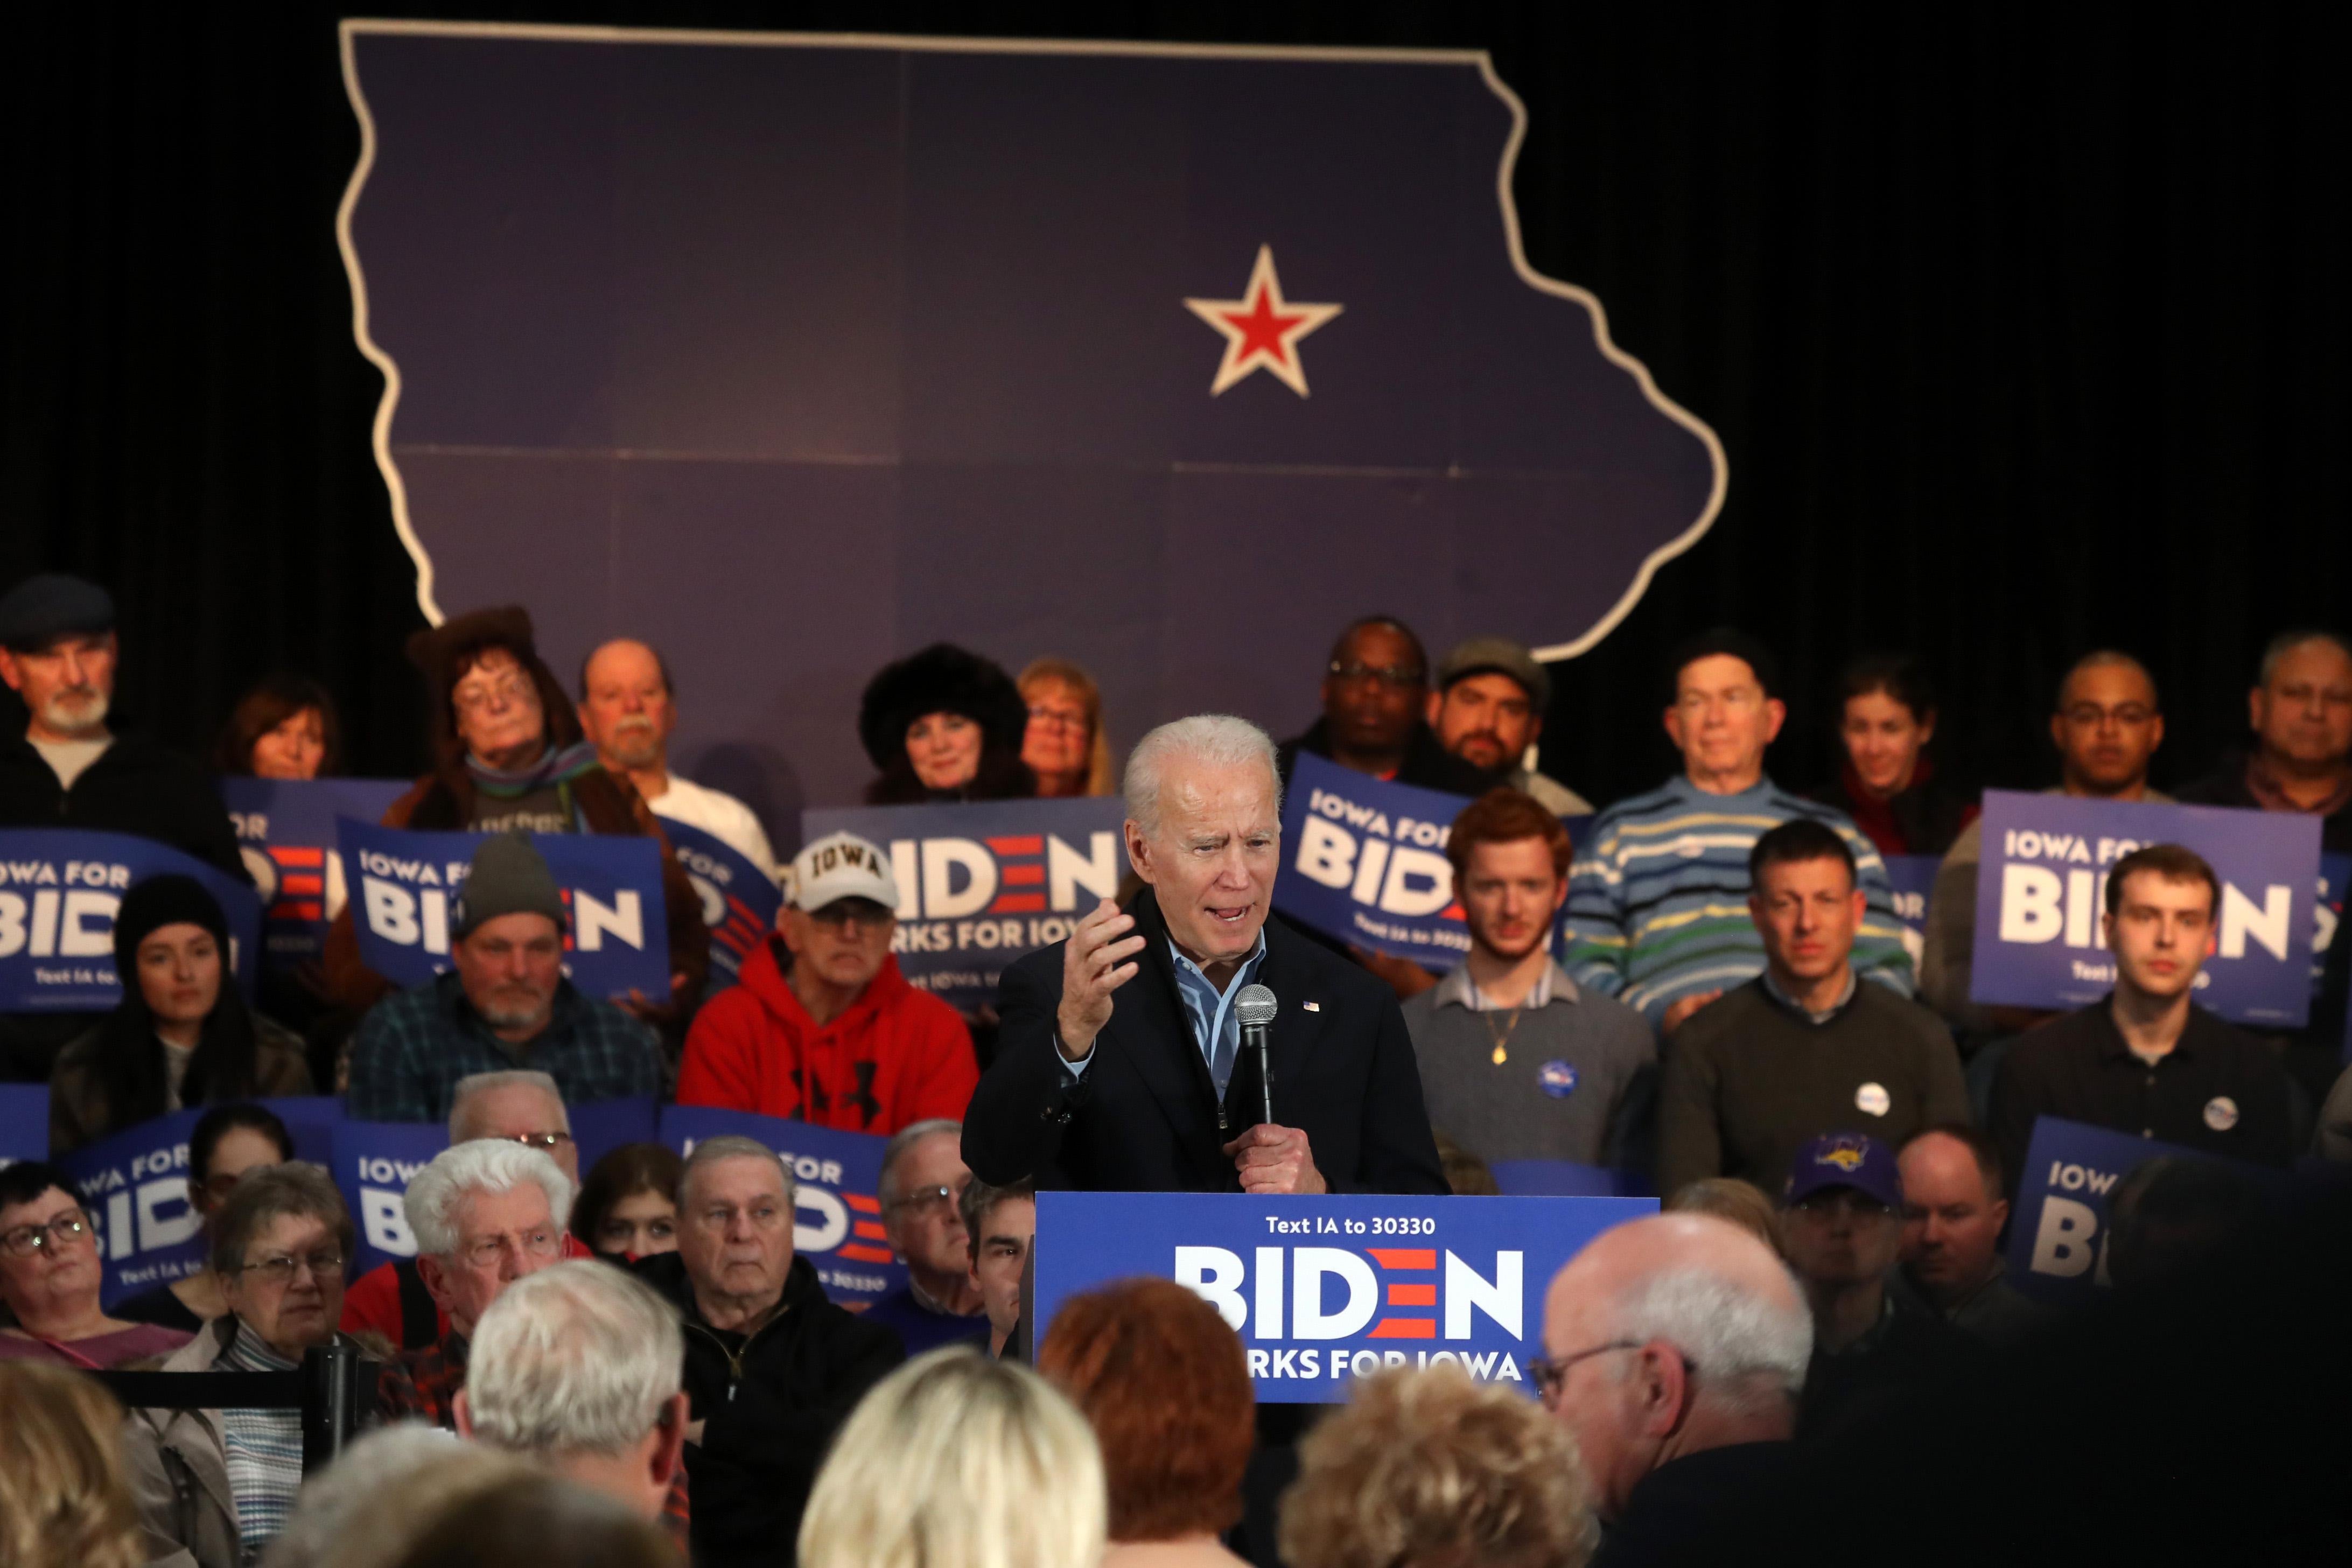 Biden speaks surrounded by "Biden Works for Iowa" signs. Behind him is an outline of the U.S., with a star over Iowa.